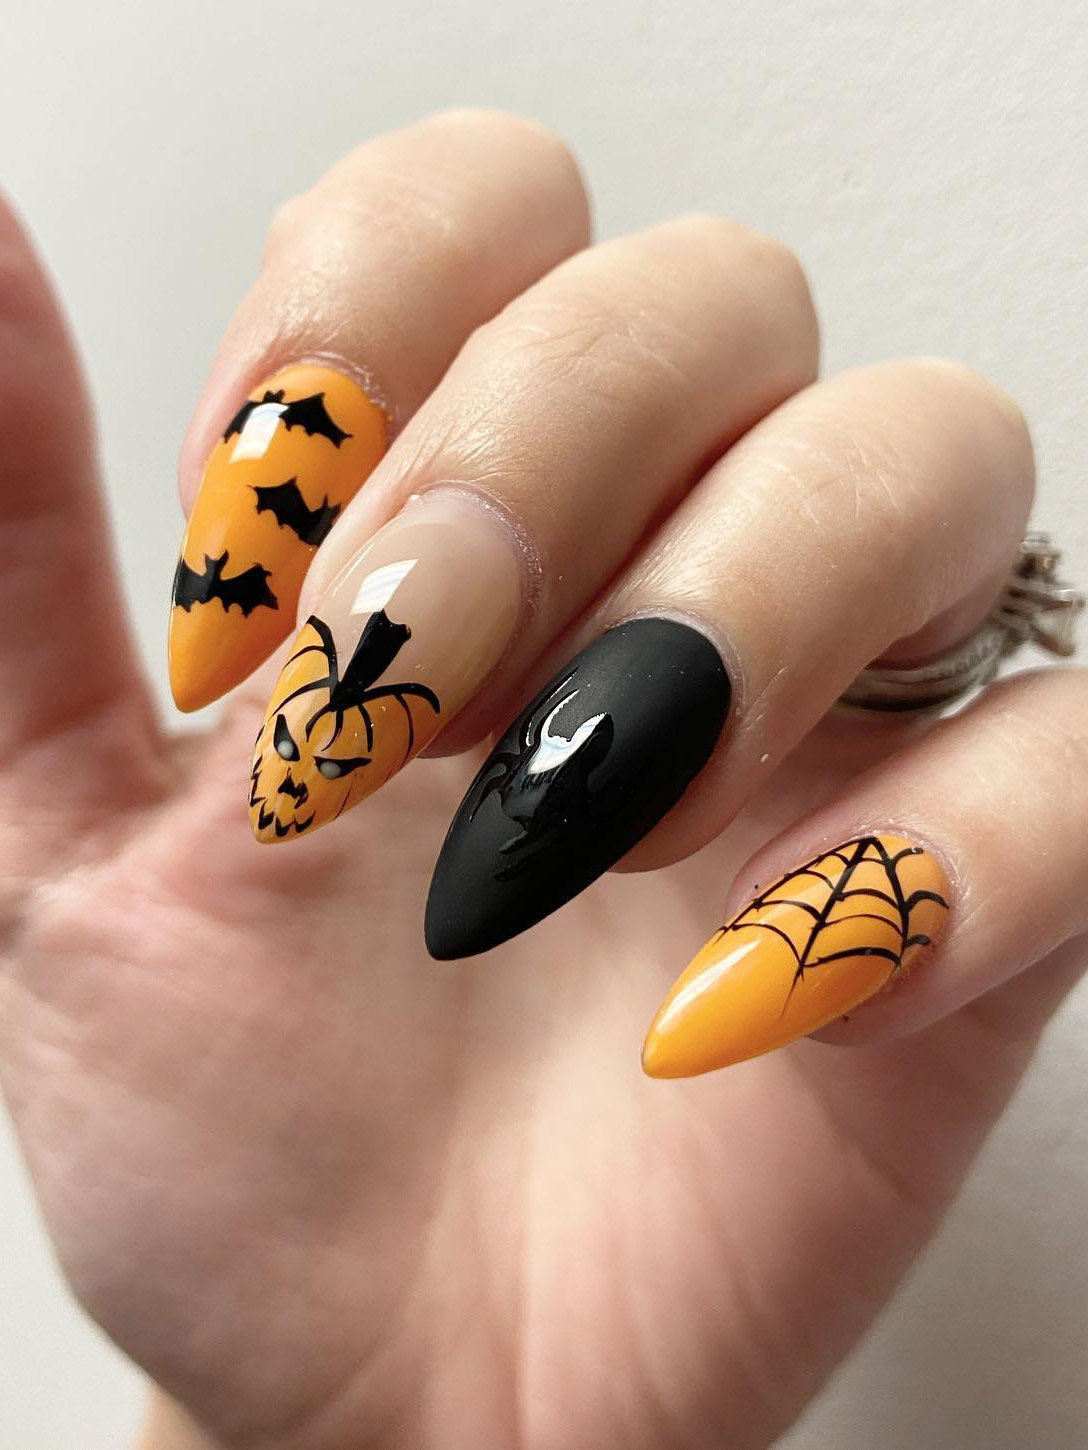 Classic bat, pumpkin and spider nails for Halloween